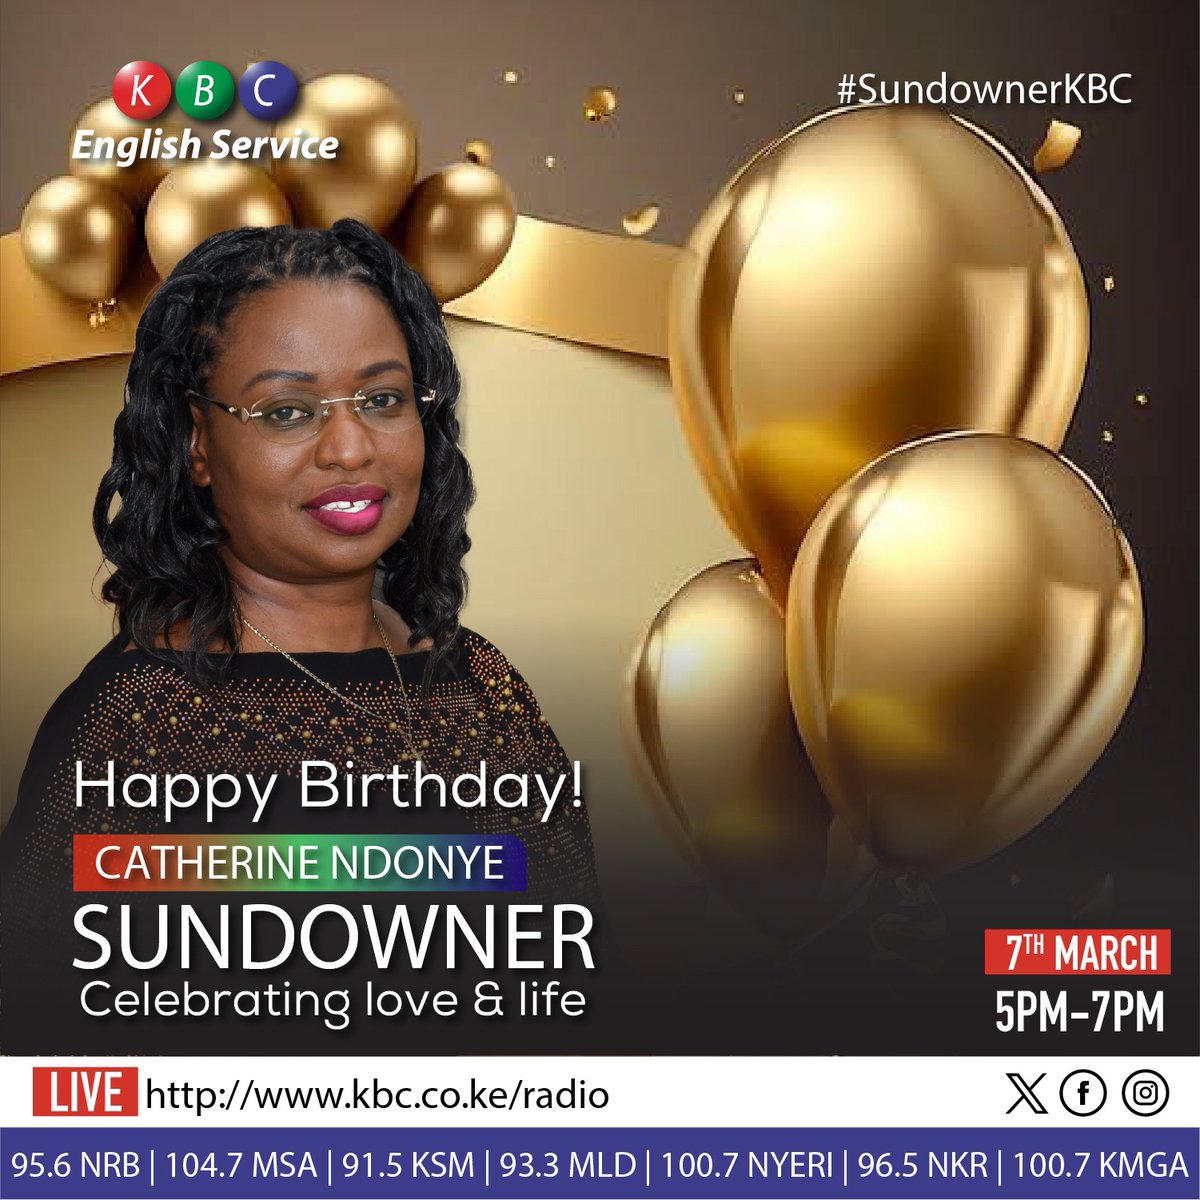 Another trip around the sun It's a special day for me which makes it a special show for you.Come celebrate with me as we say THANK YOU for the gift of life. LIVE: kbc.co.ke/radio/ #SundownerKBC @kbcenglish